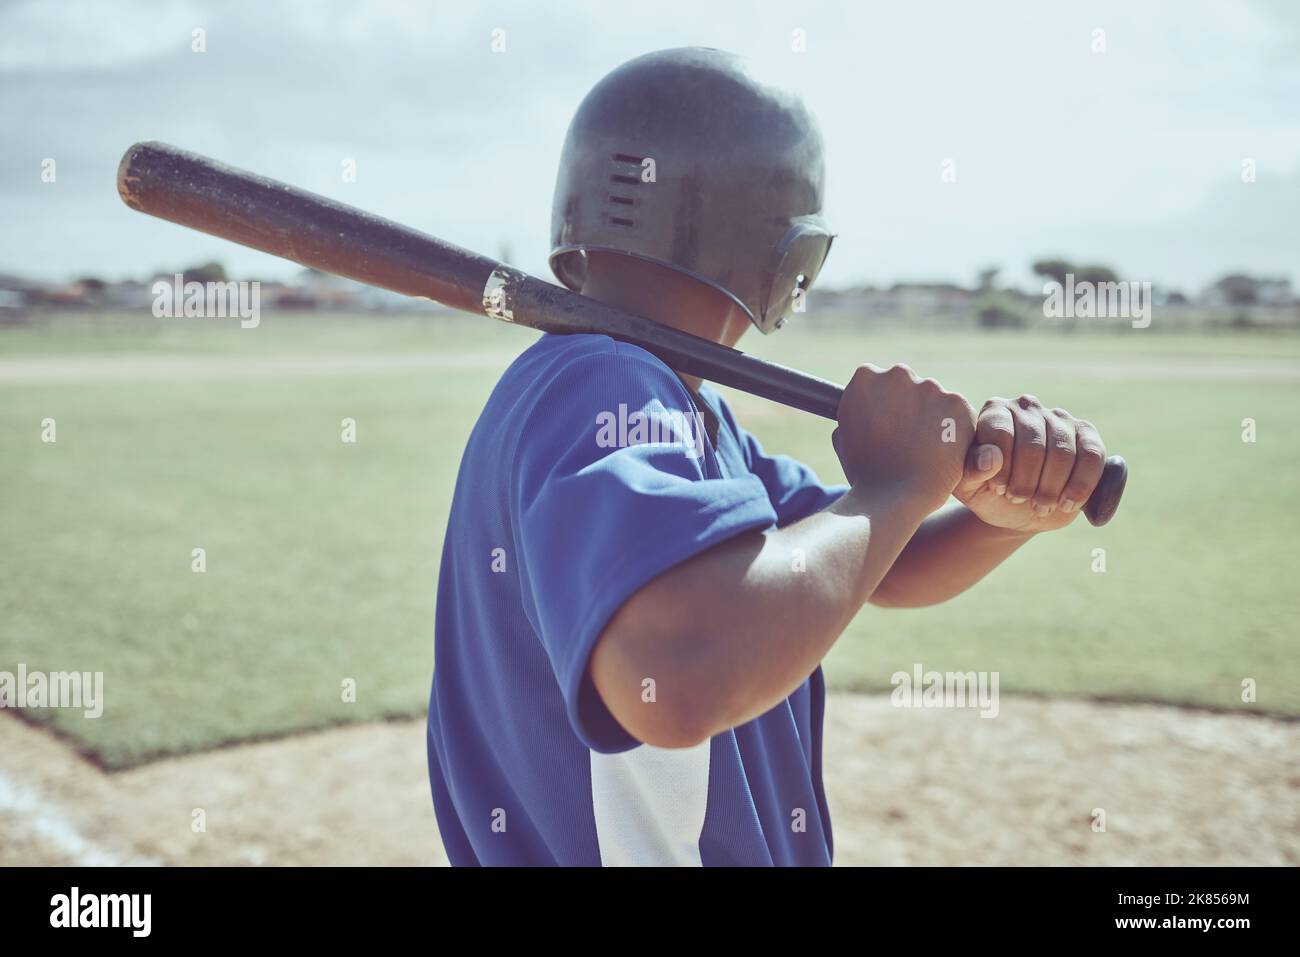 Baseball, baseball batter and back view of black man on field ready to hit ball during match, game or competition. Sports, fitness and baseball player Stock Photo